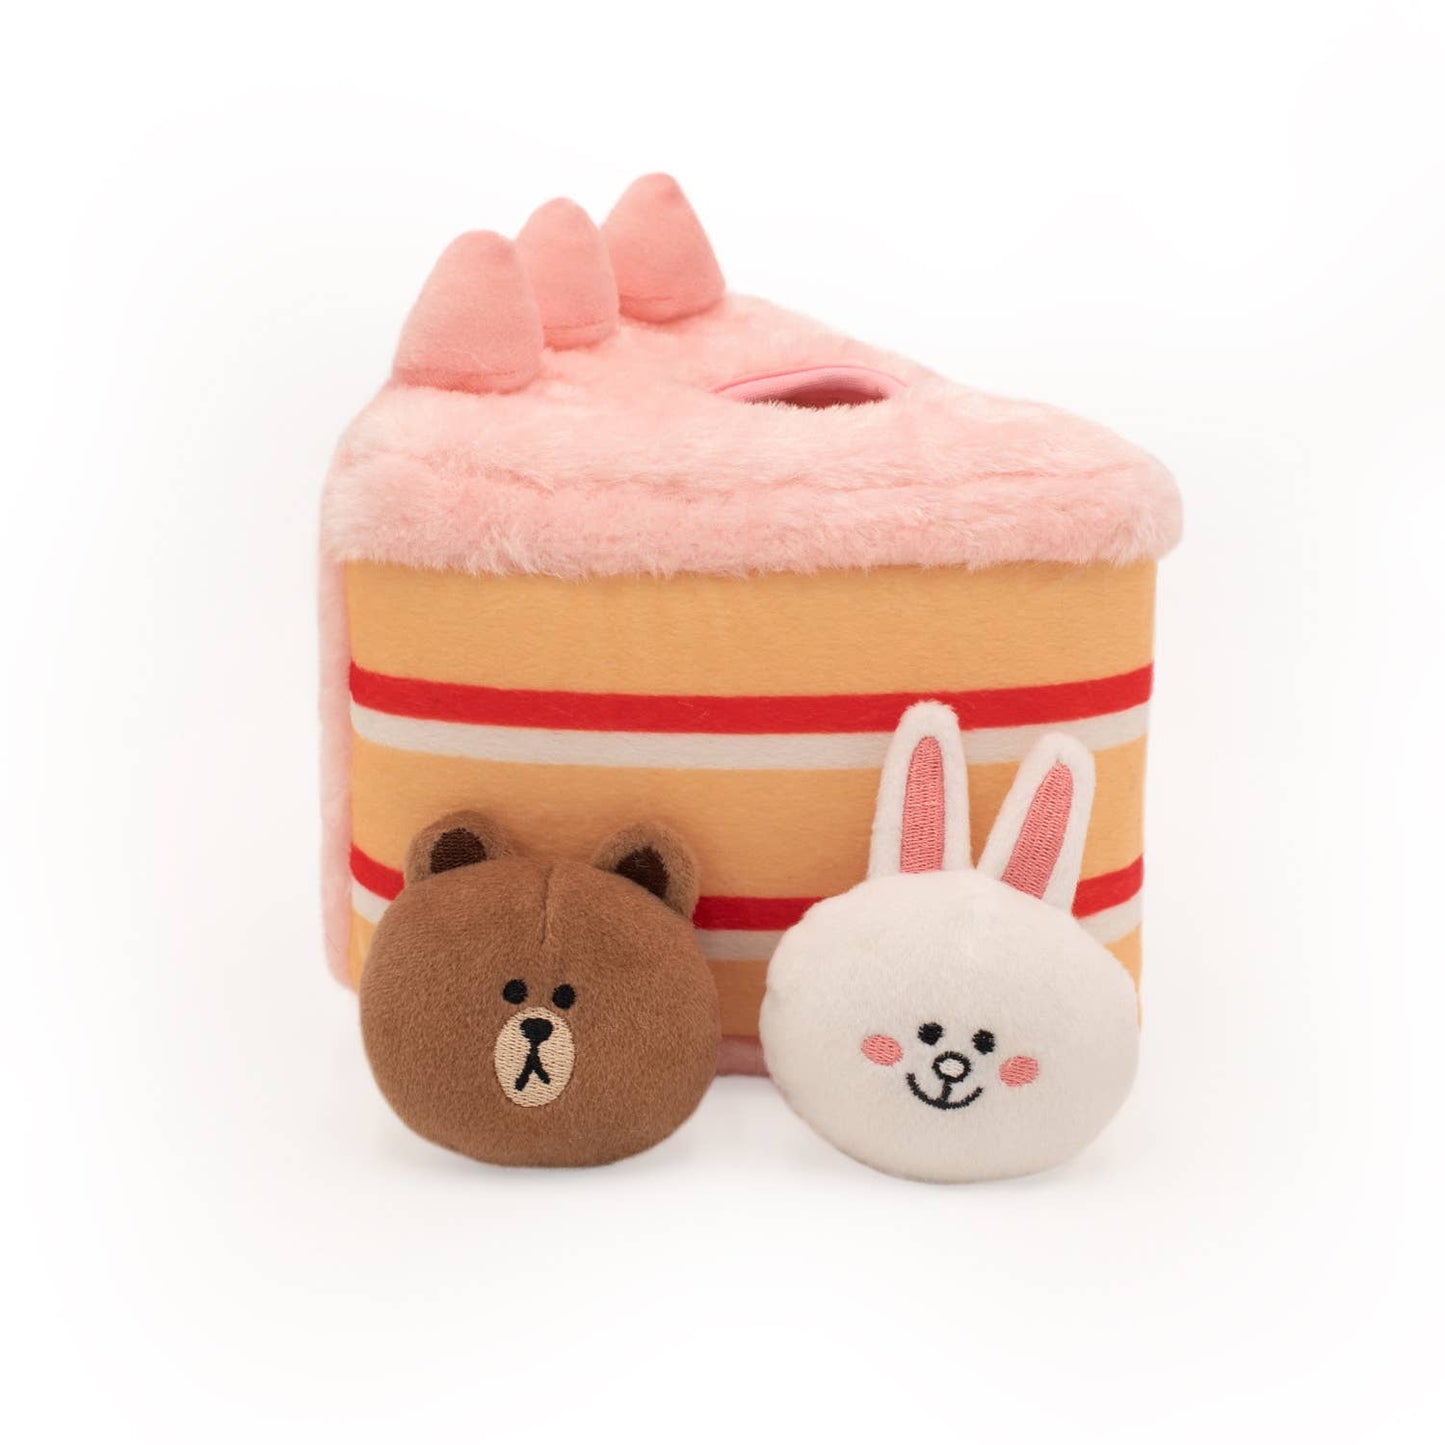 ZippyPaws - Zippy Burrow™ - Brown and Friends in Cake (U.S. SALE ONLY)  Image